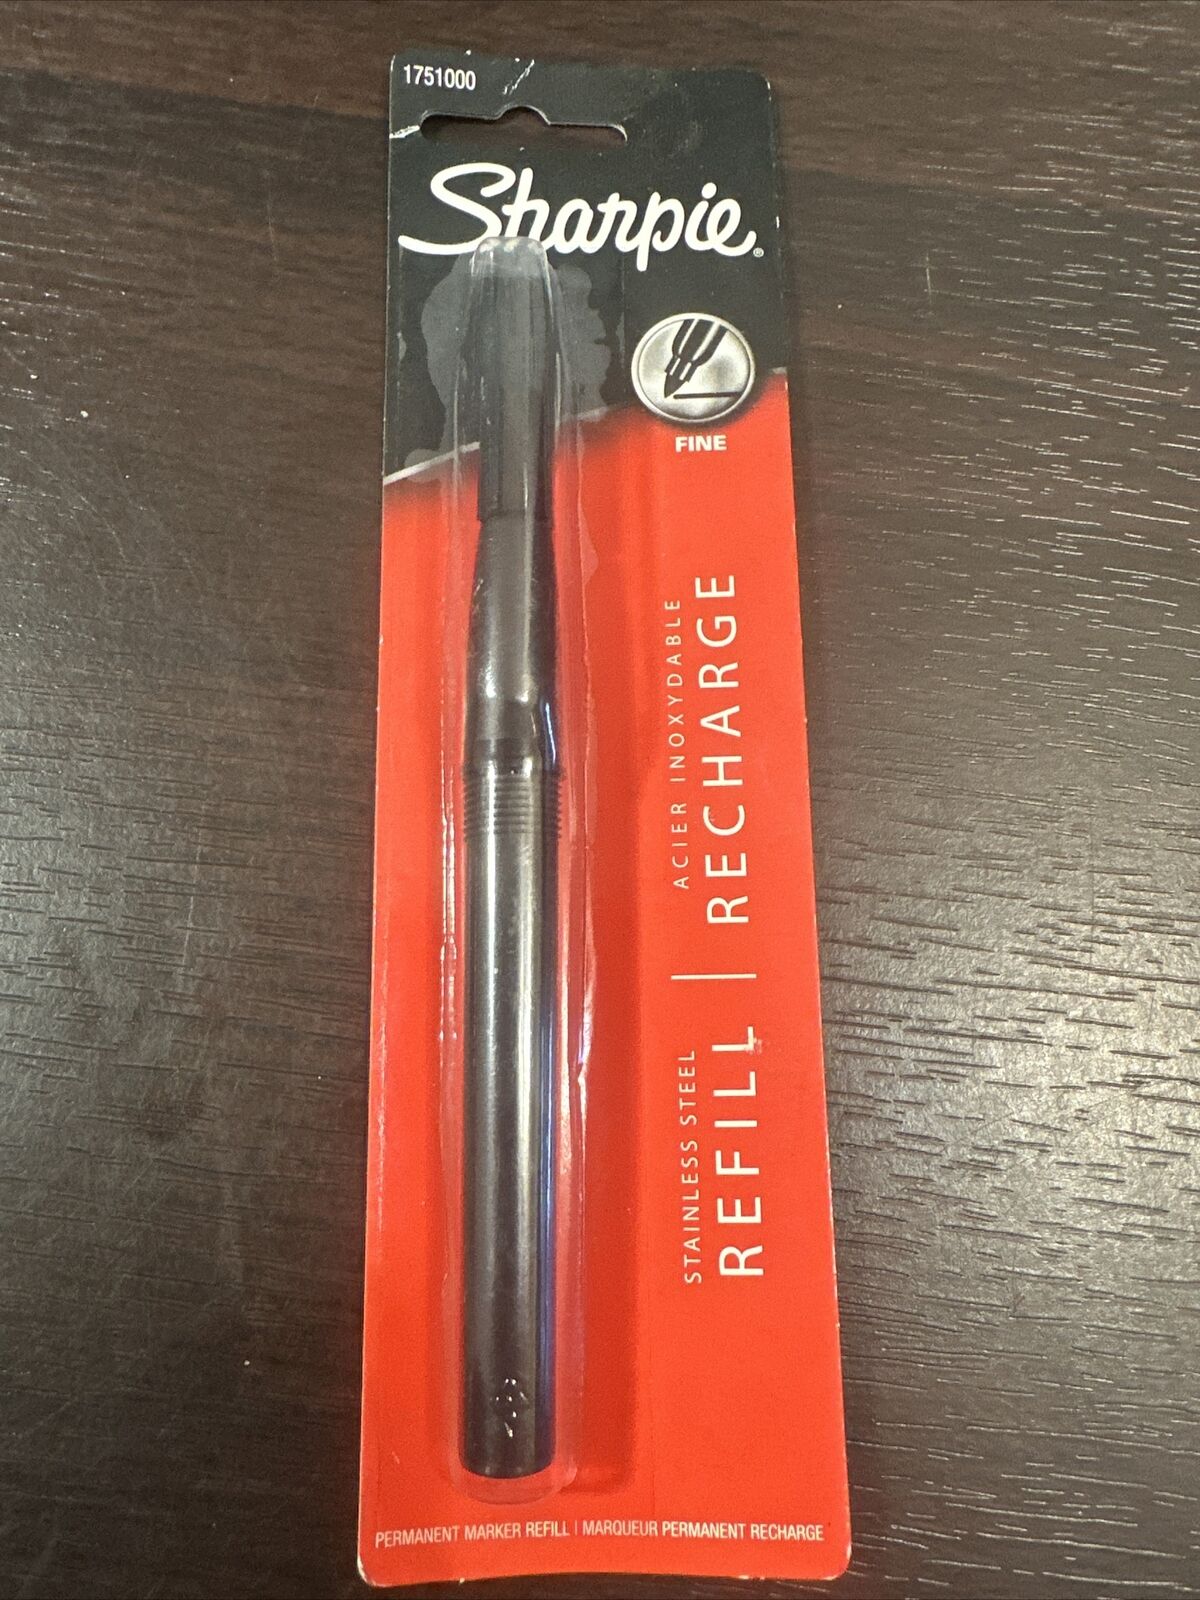 Sharpie vintage Stainless Steel Refillable Permanent Marker 1751000 Sealed Nos